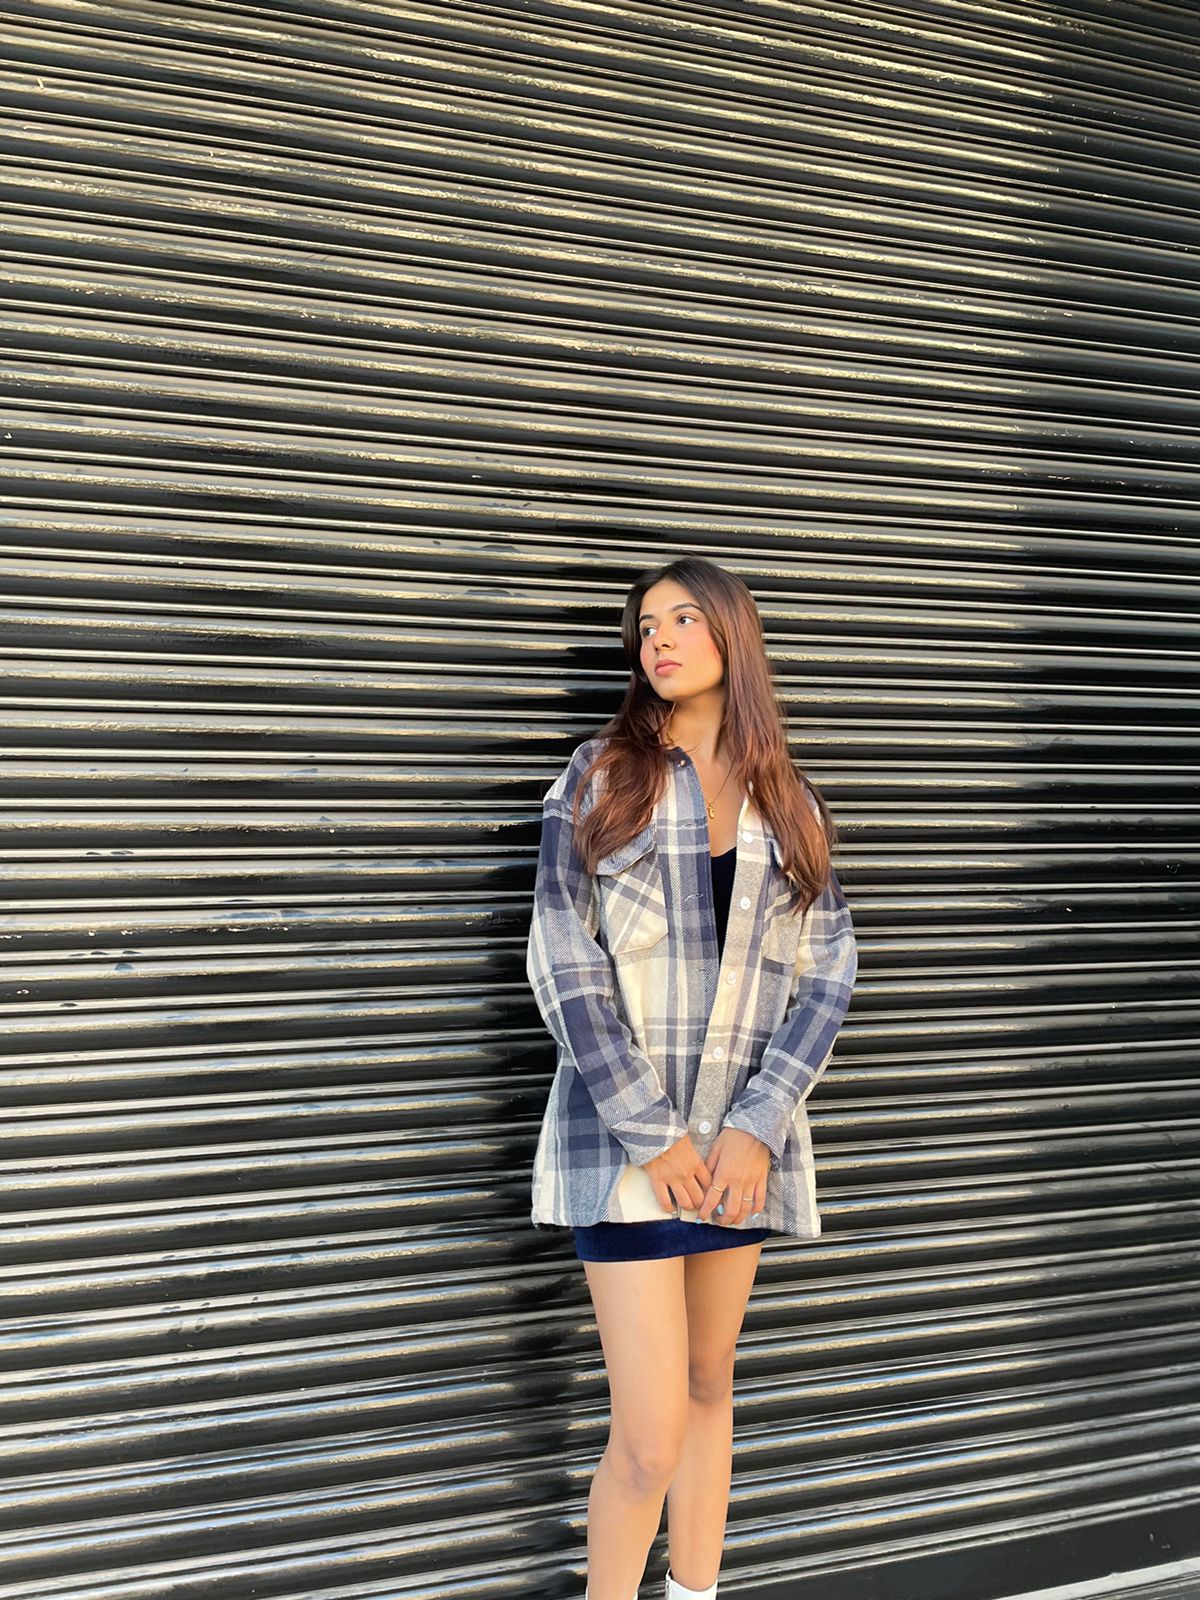 Oversized shacket in white and navy blue check print